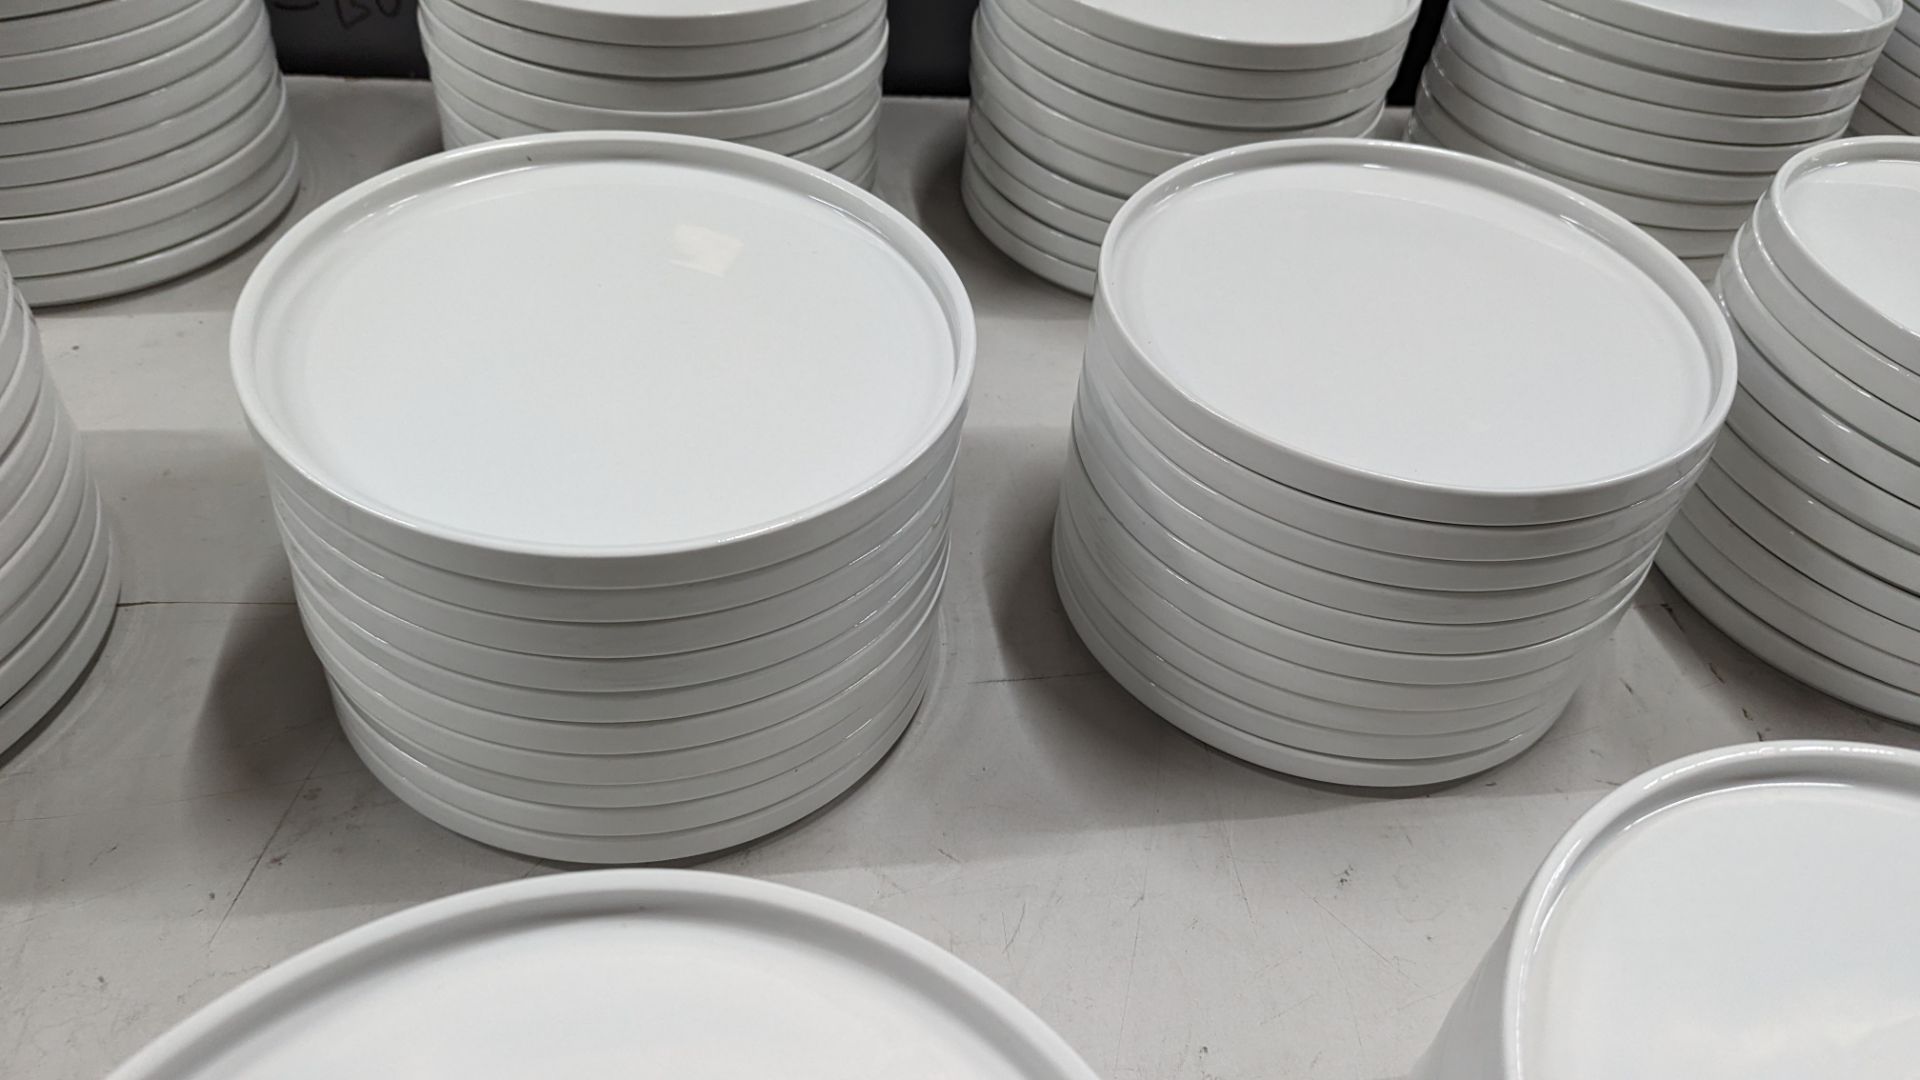 60 off Genware 245mm round flat plates with upright rim to the outer edge - Image 4 of 6